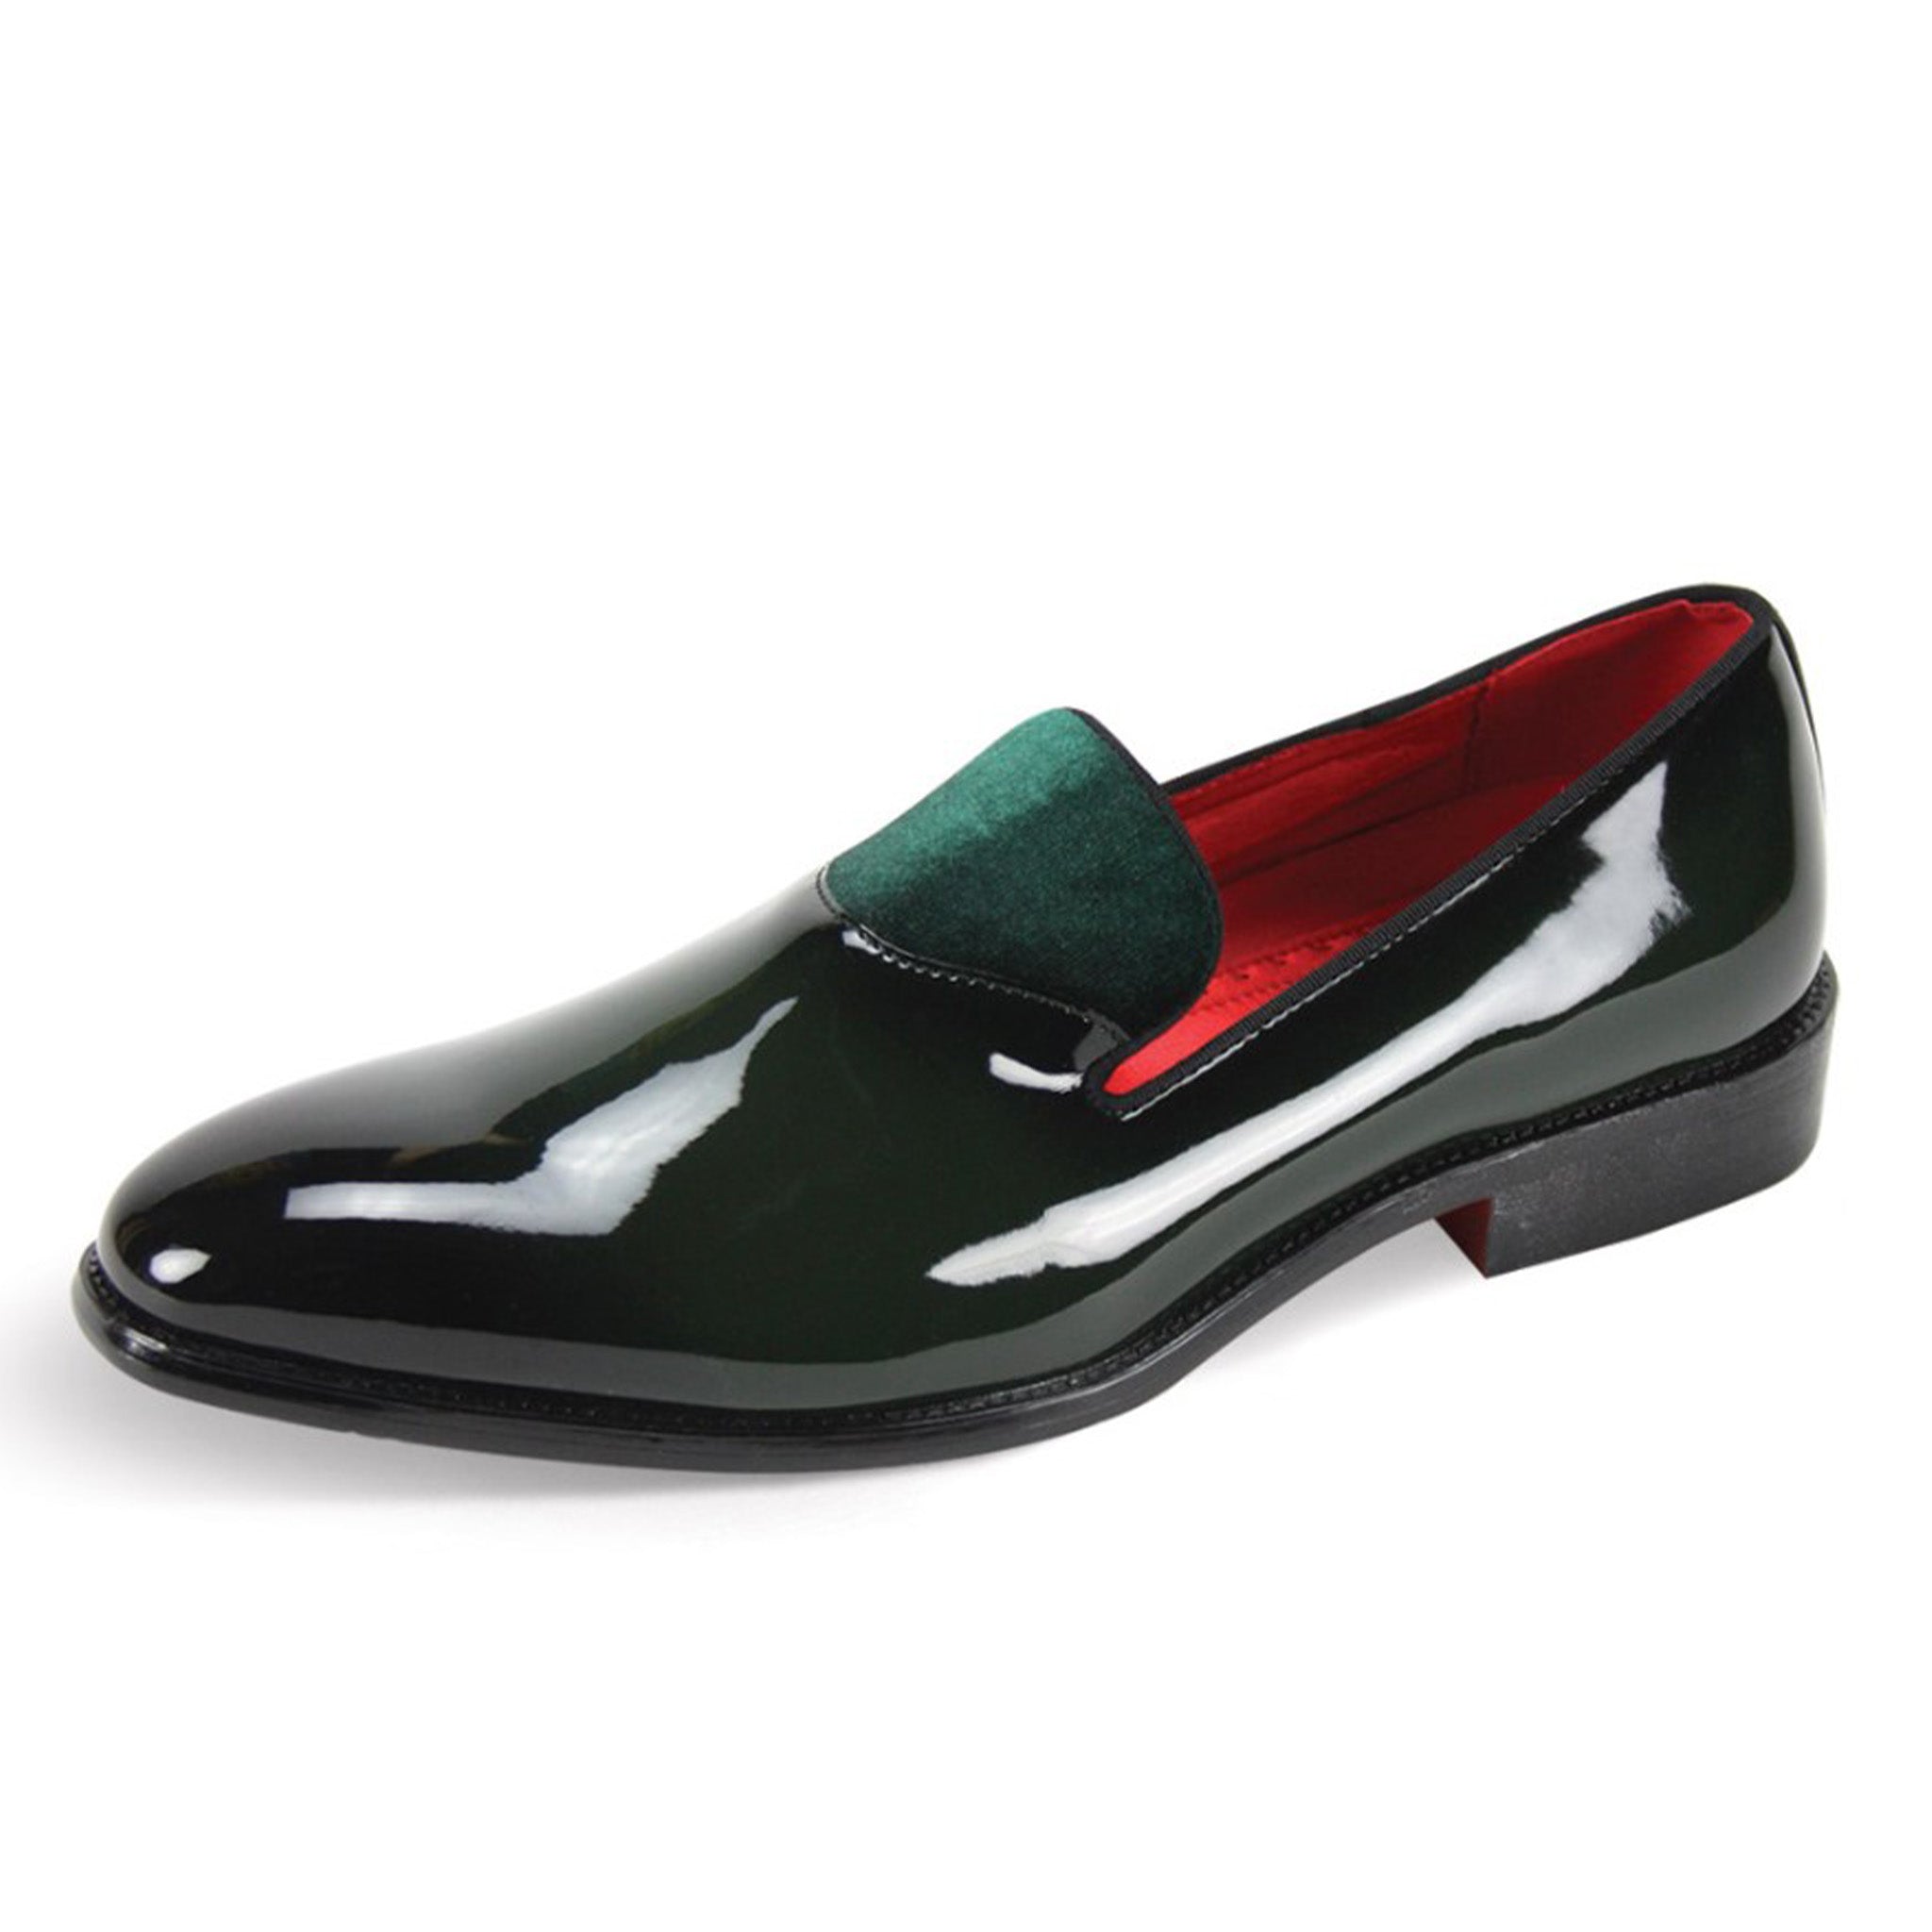 H. Green Patent Fashion Loafer